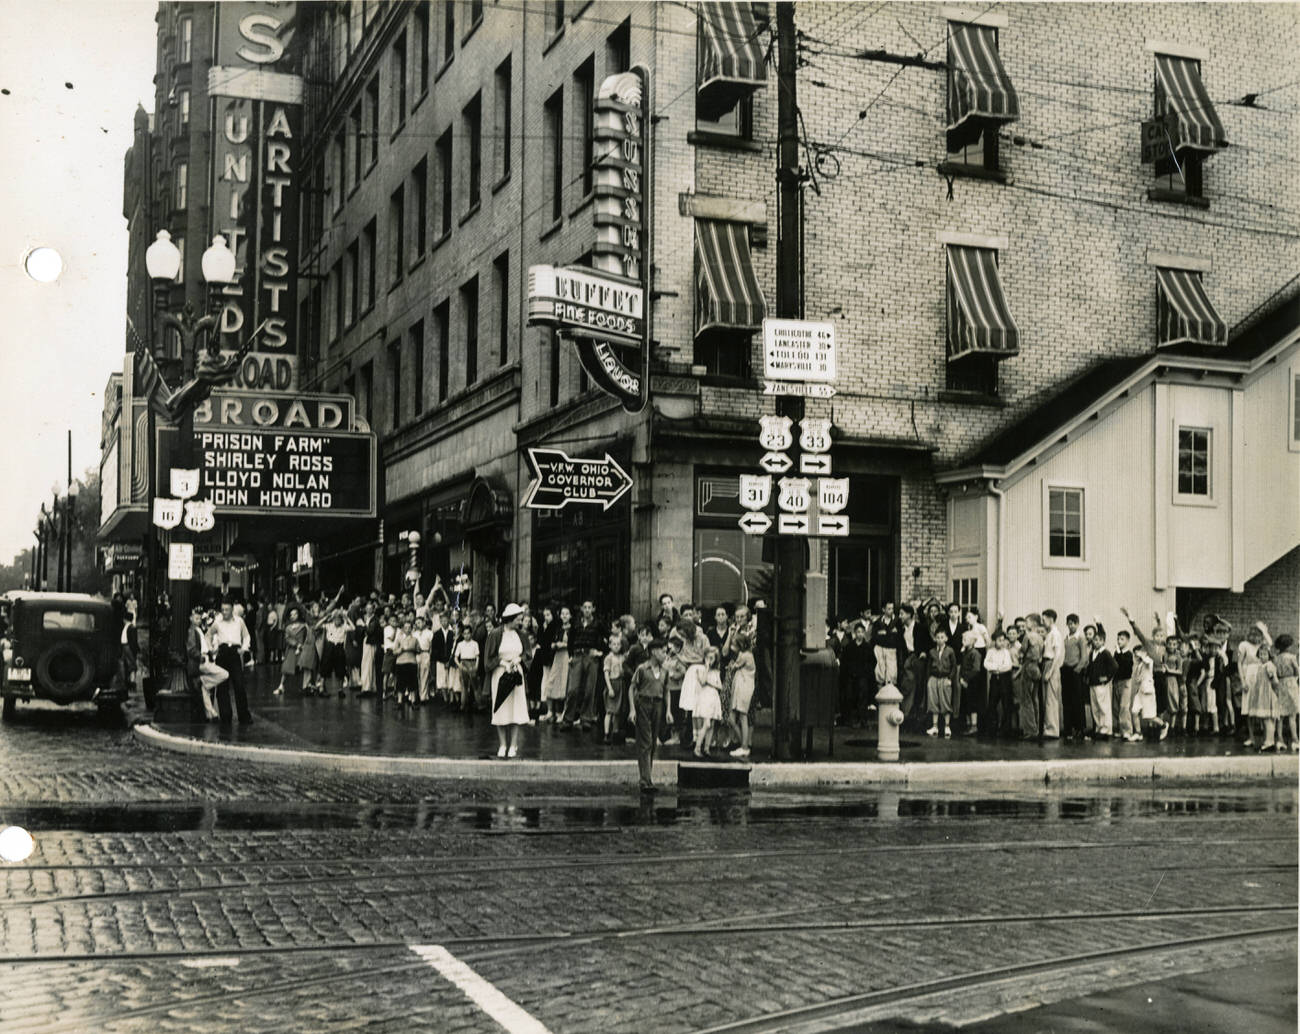 Crowds outside of the Loew’s Broad Theater, Columbus, for "Prison Farm" in 1938.